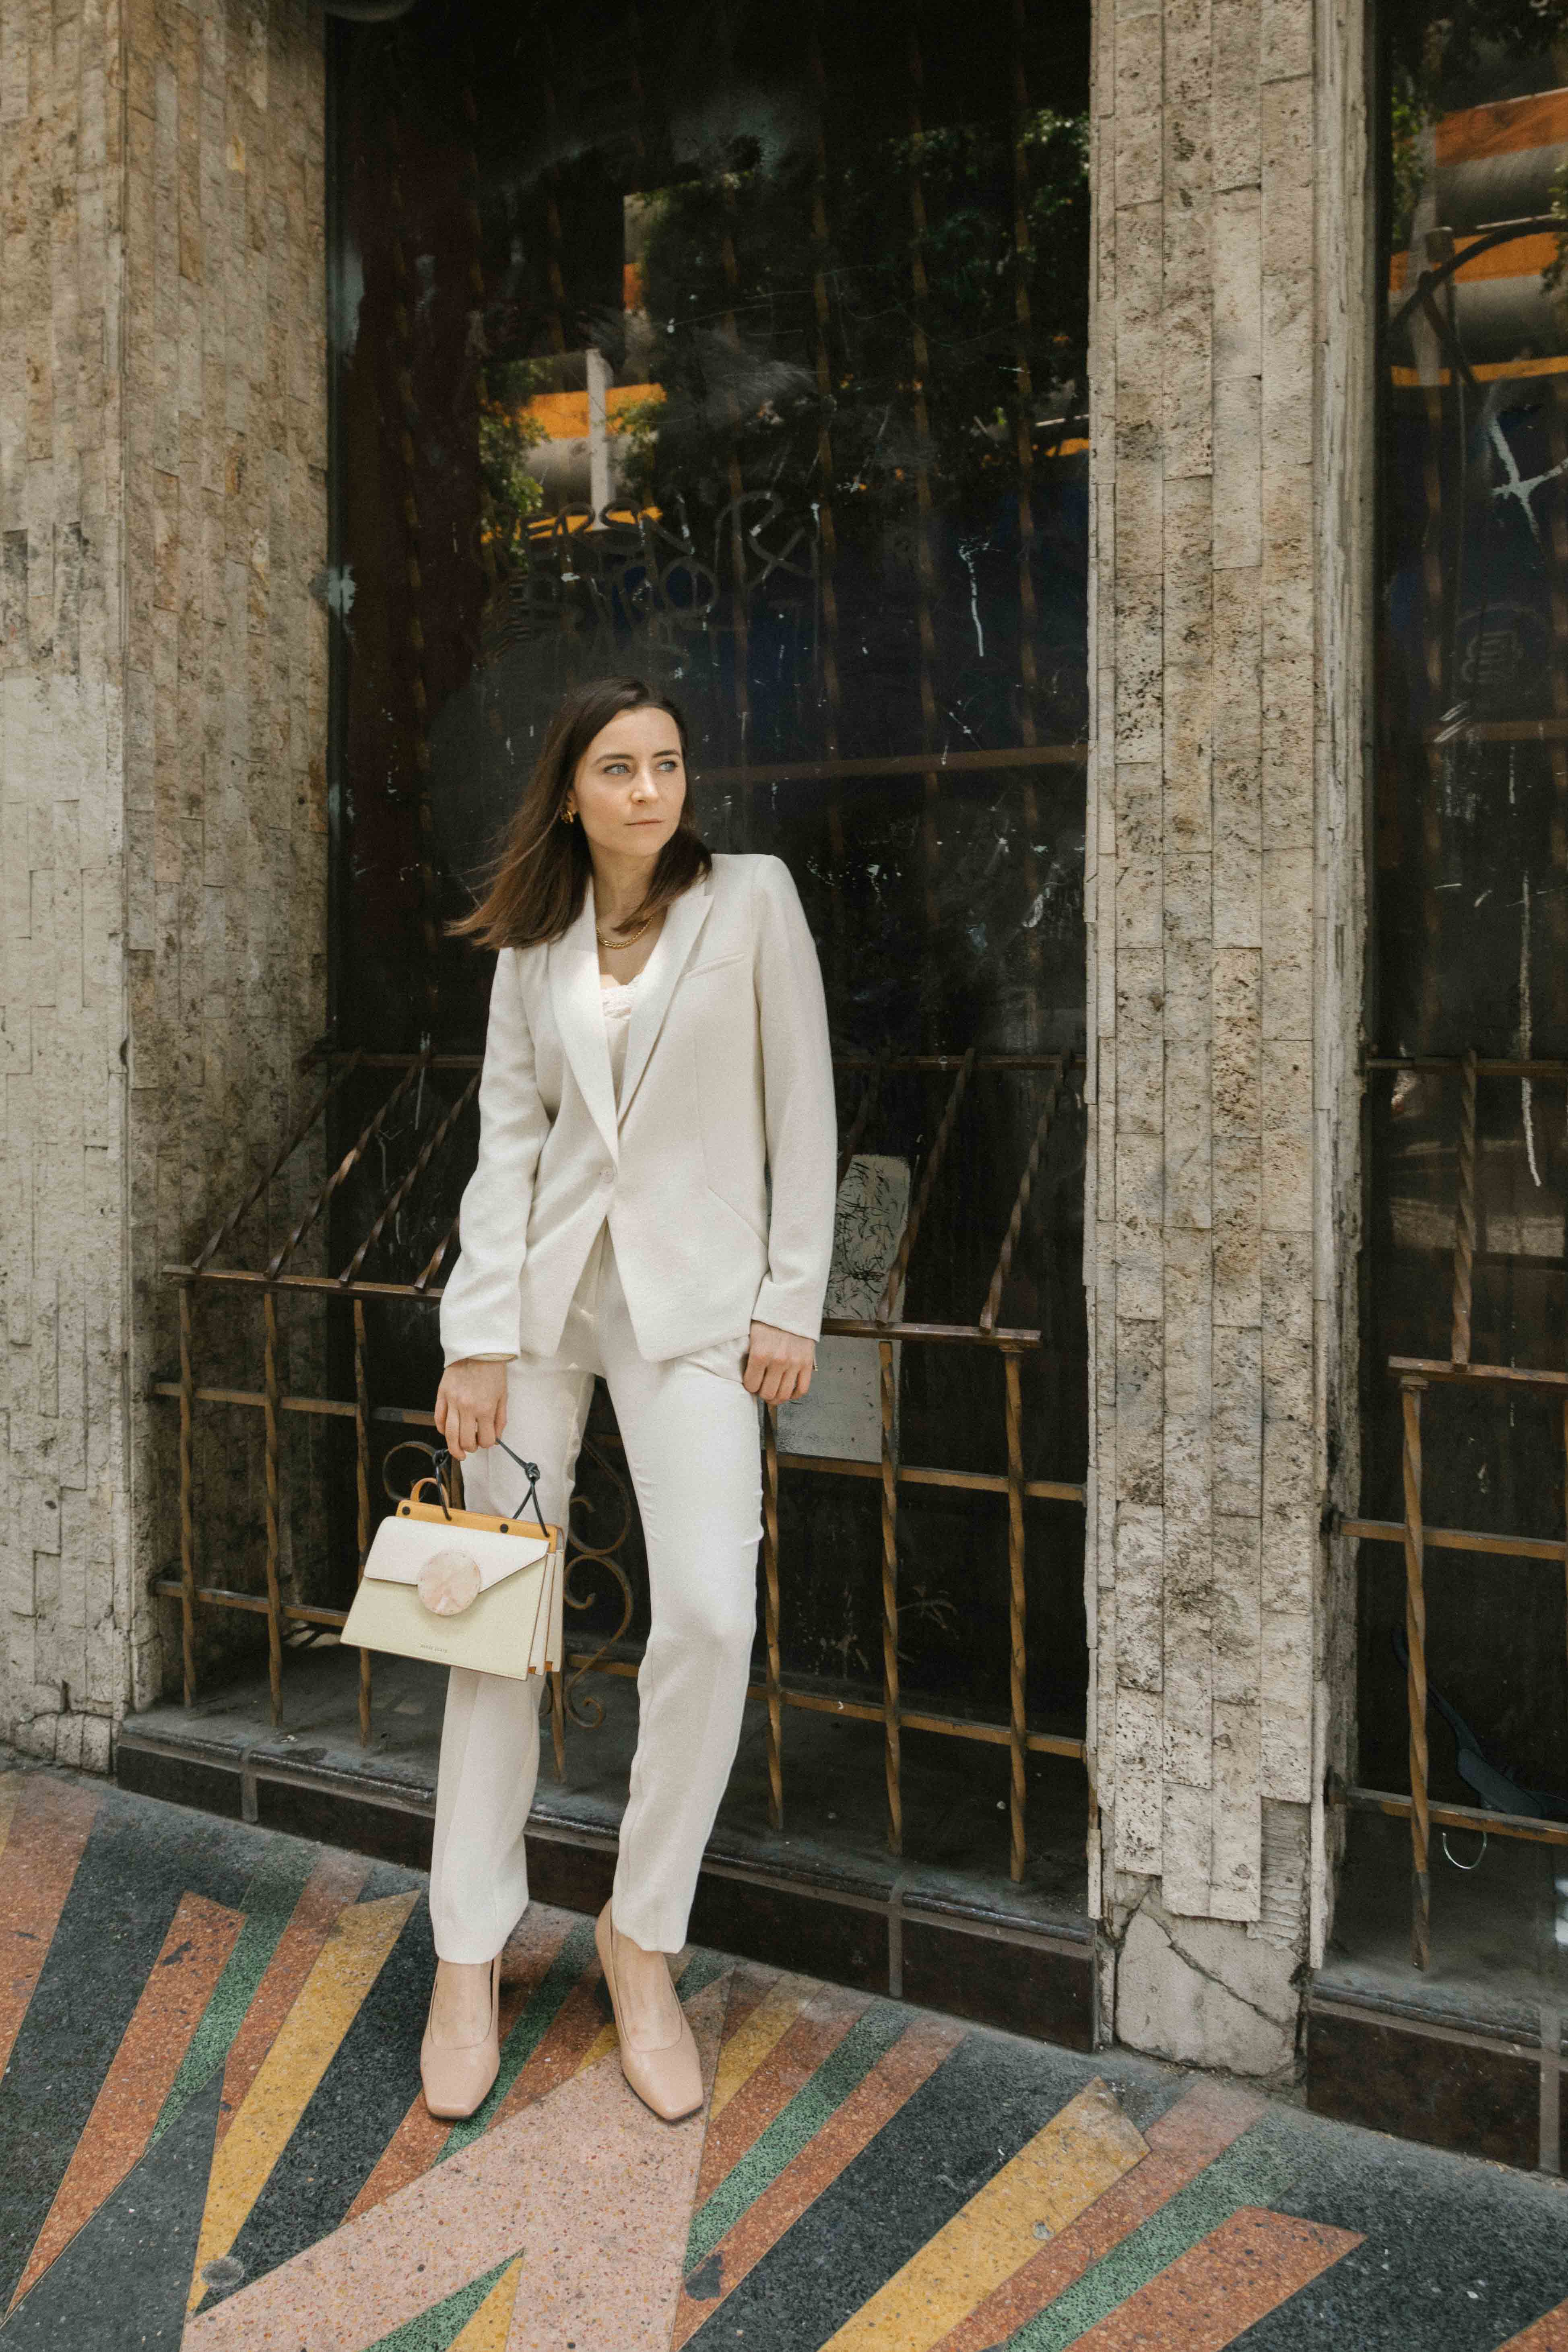 How to wear the white suit for women. White party outfit ideas and summer outfit ideas are on Modersvp.com. White suit from Ba&Sh Paris worn by Julia Comil Bracelet Lizzie Fortunato